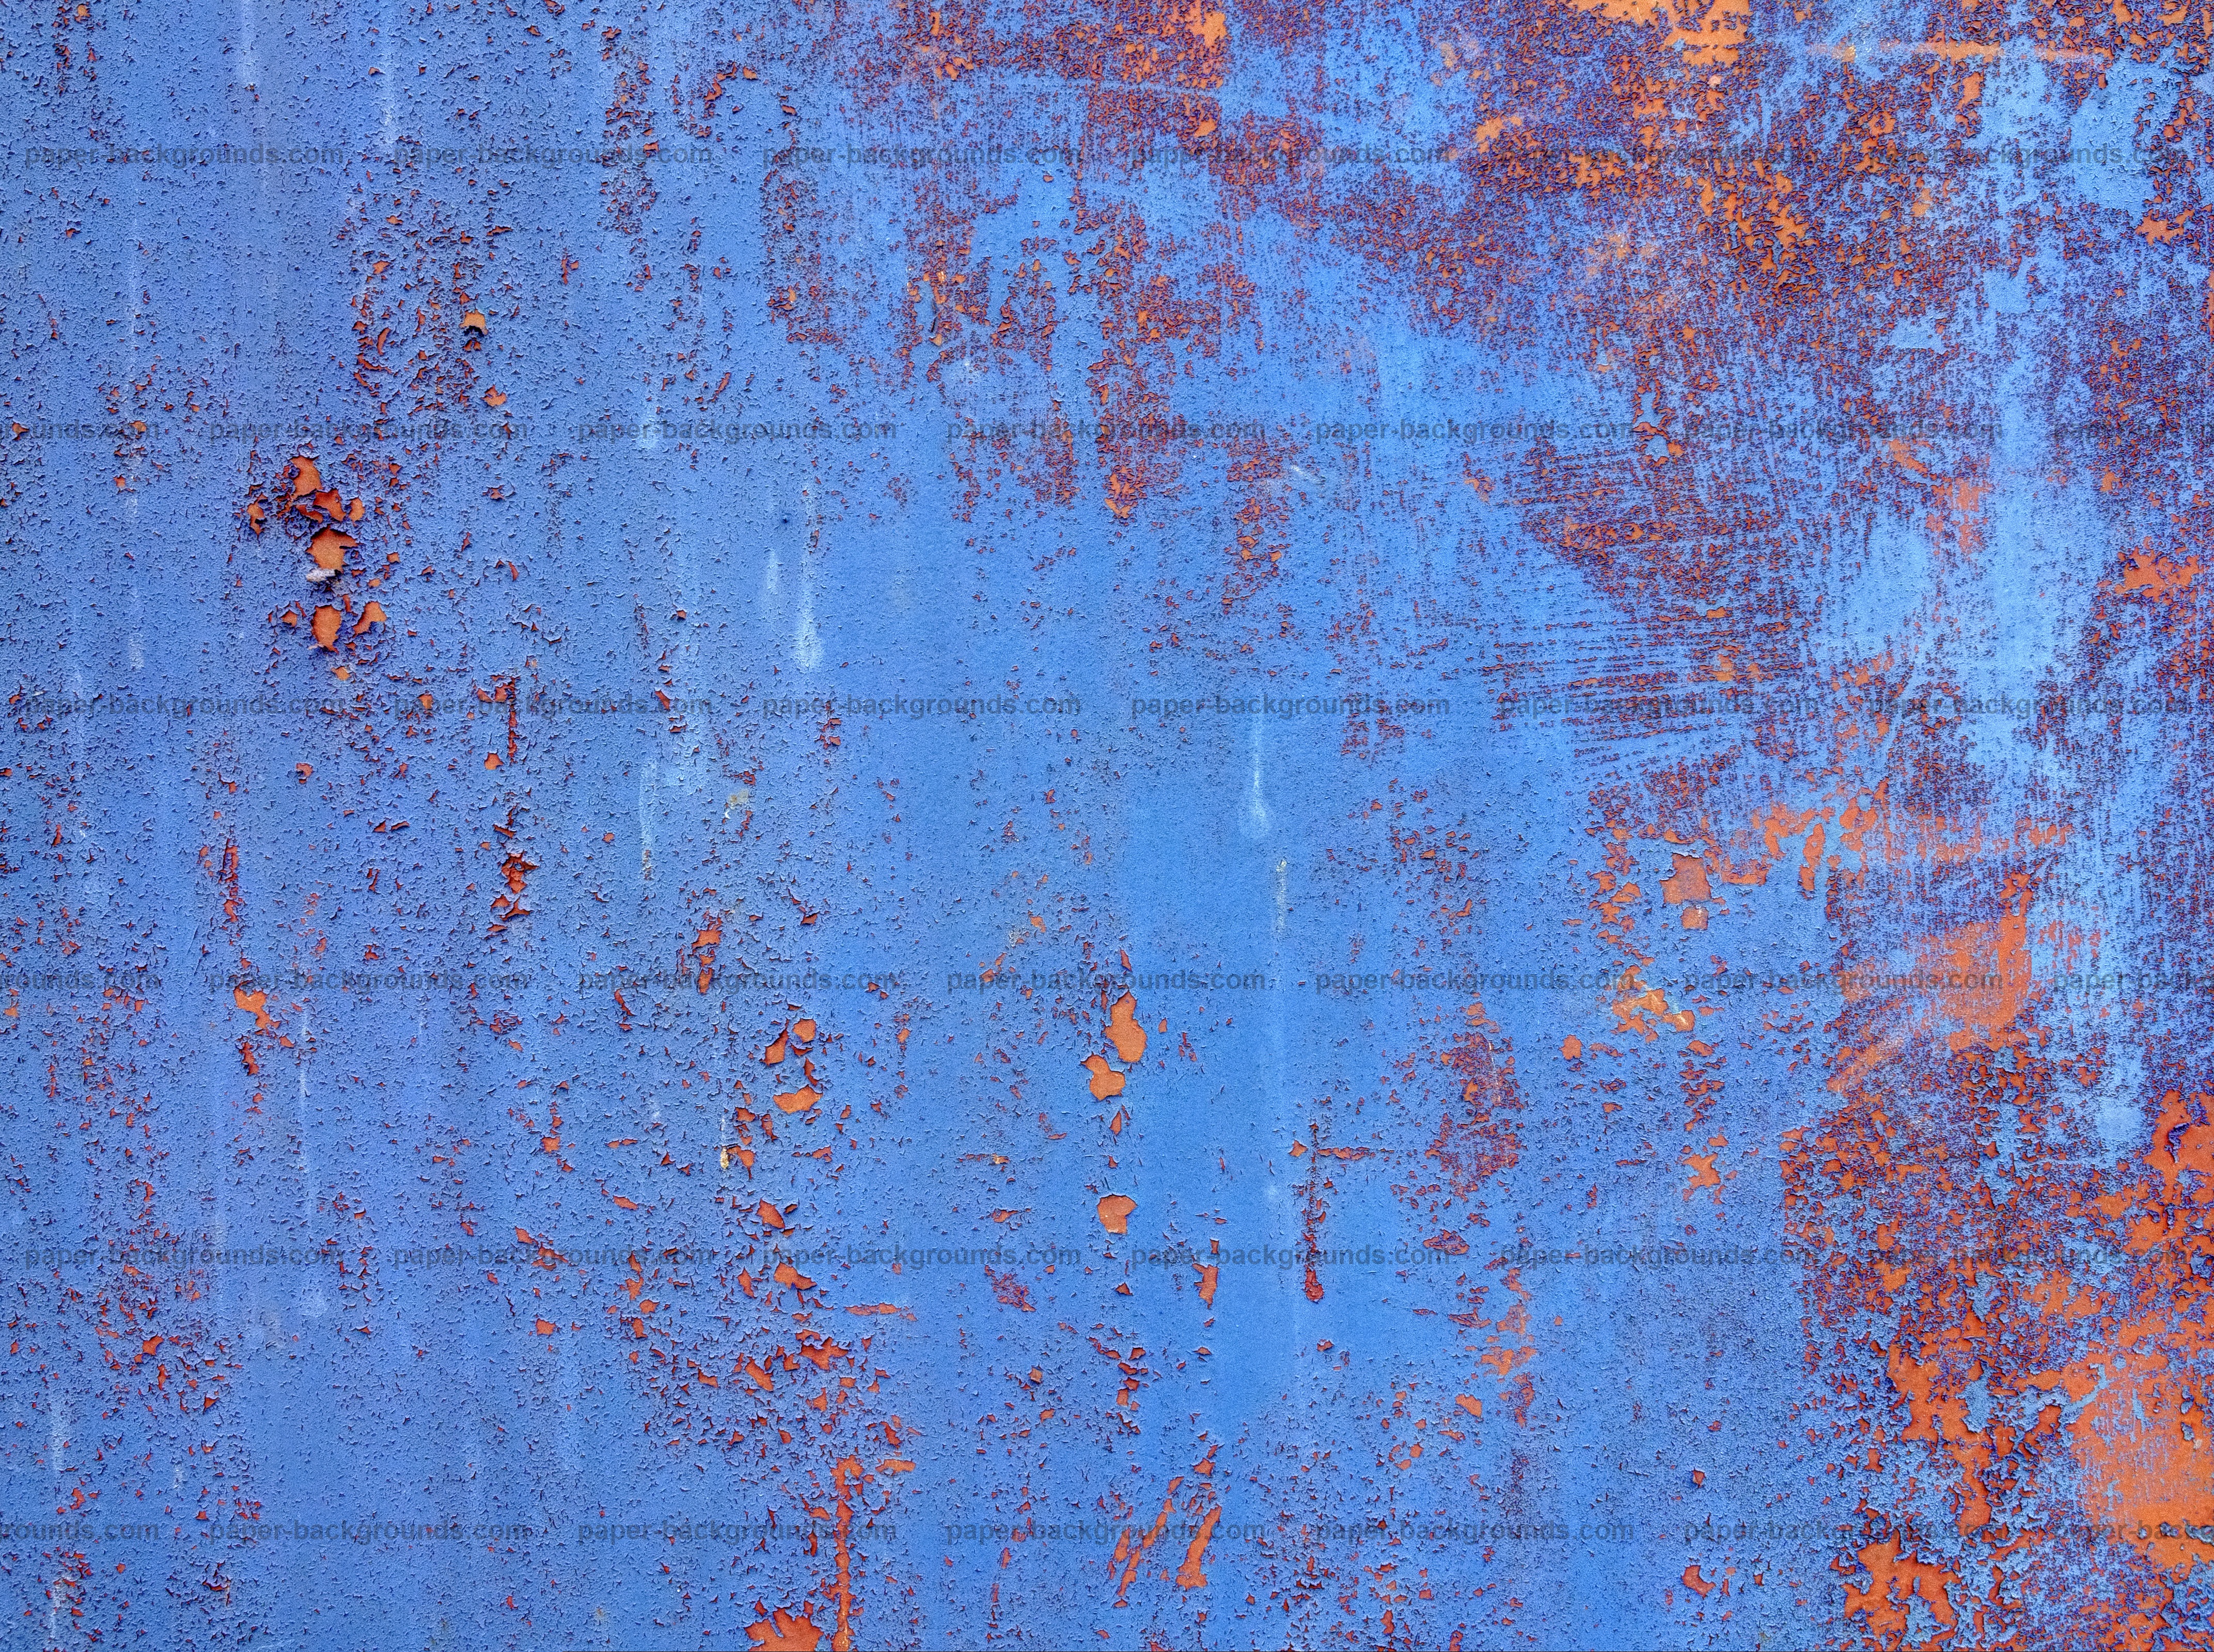 Paper Backgrounds | Grunge Blue Rusty Metal Panel Texture